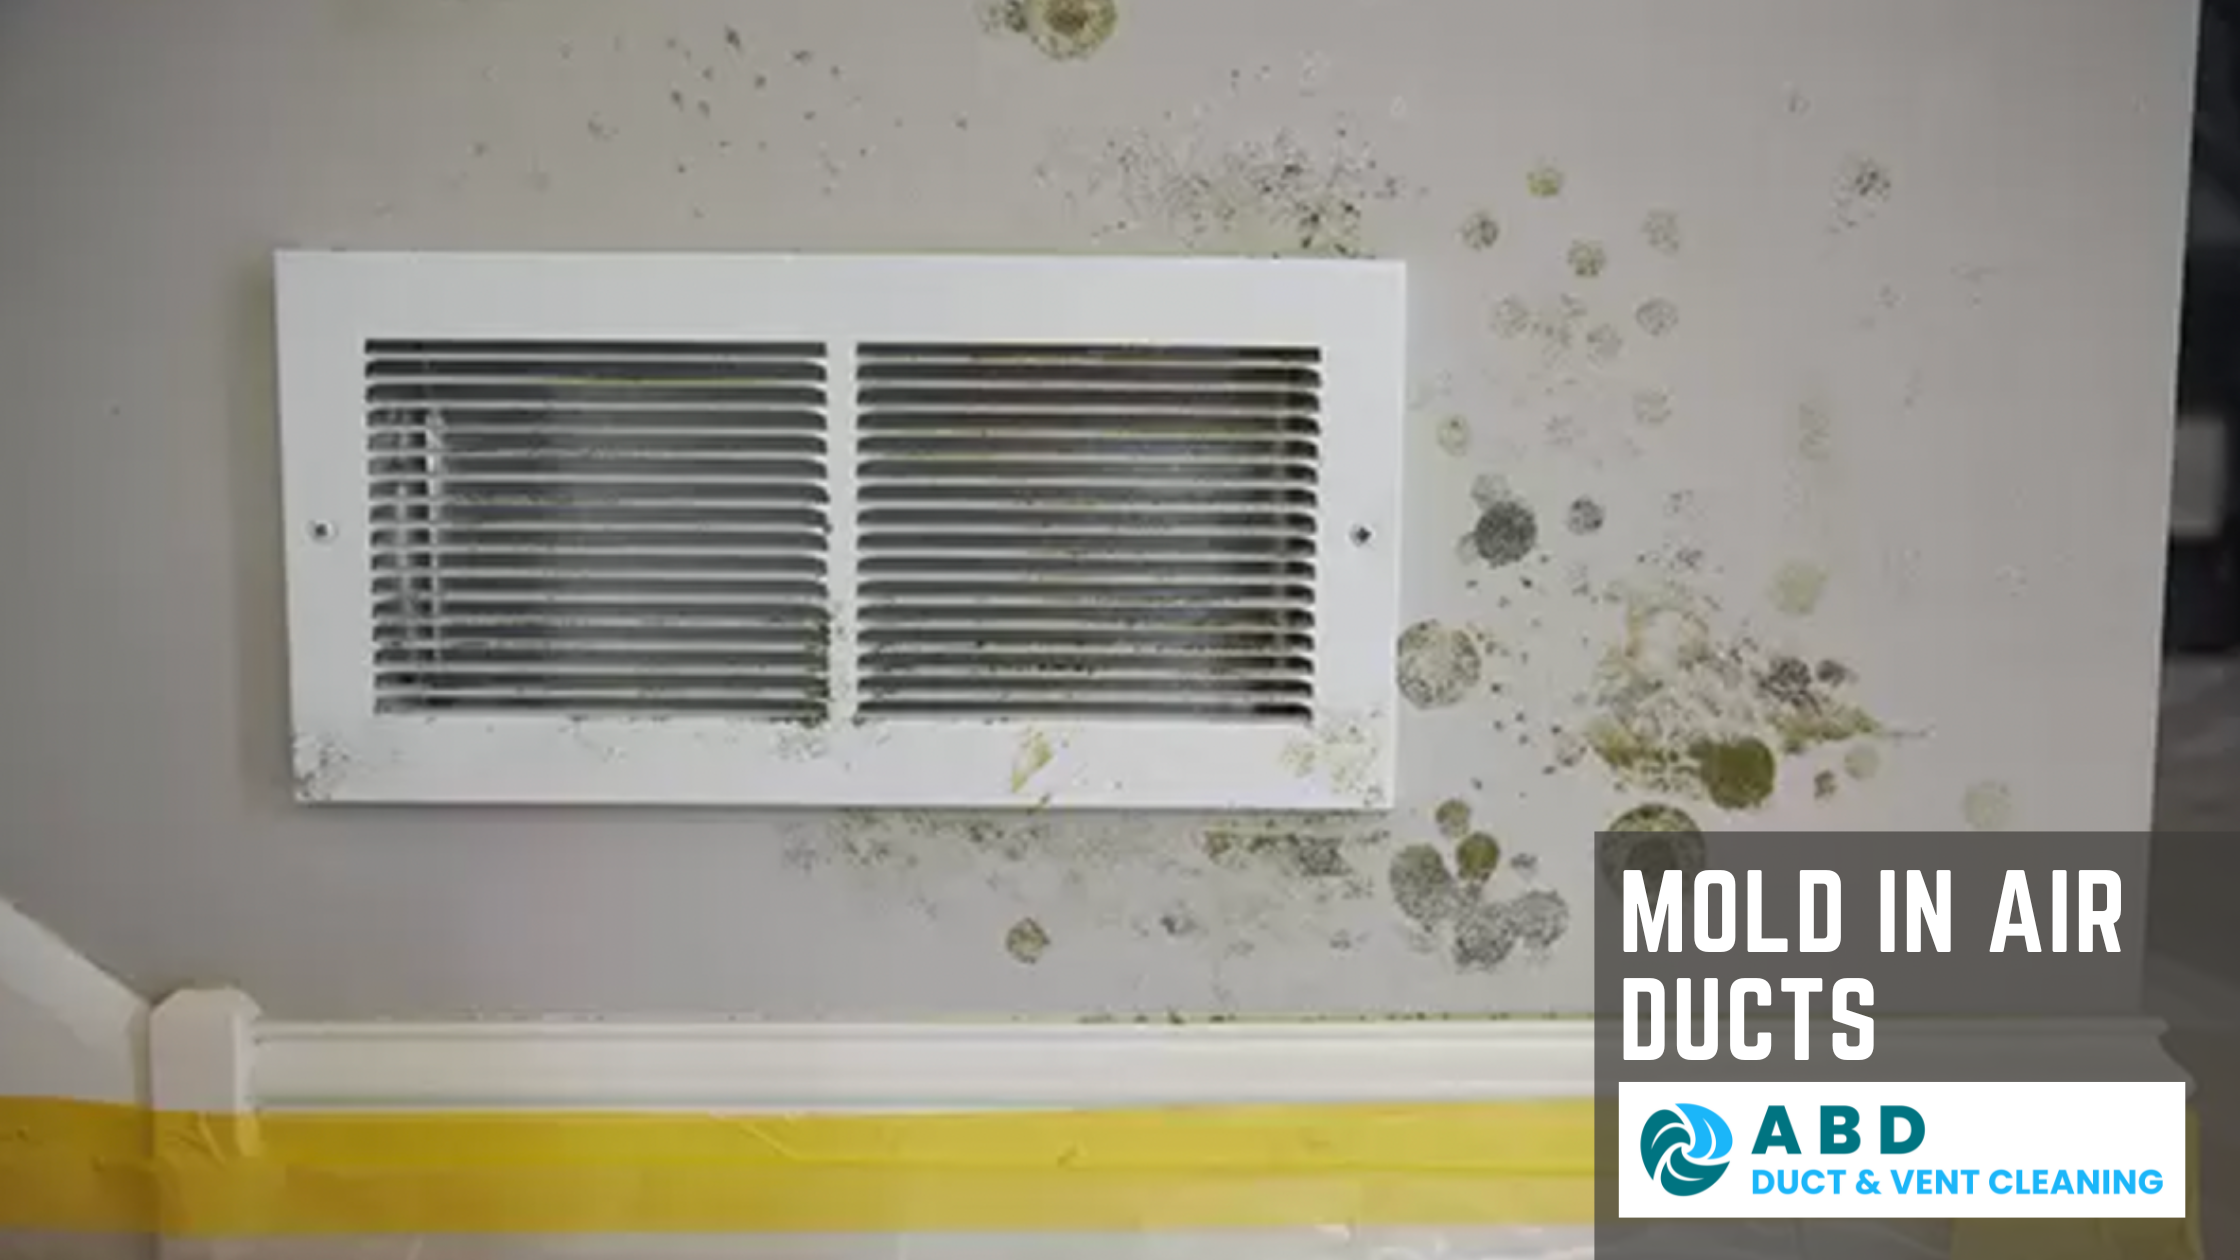 Mold in Air Ducts. Mold in Air Vent